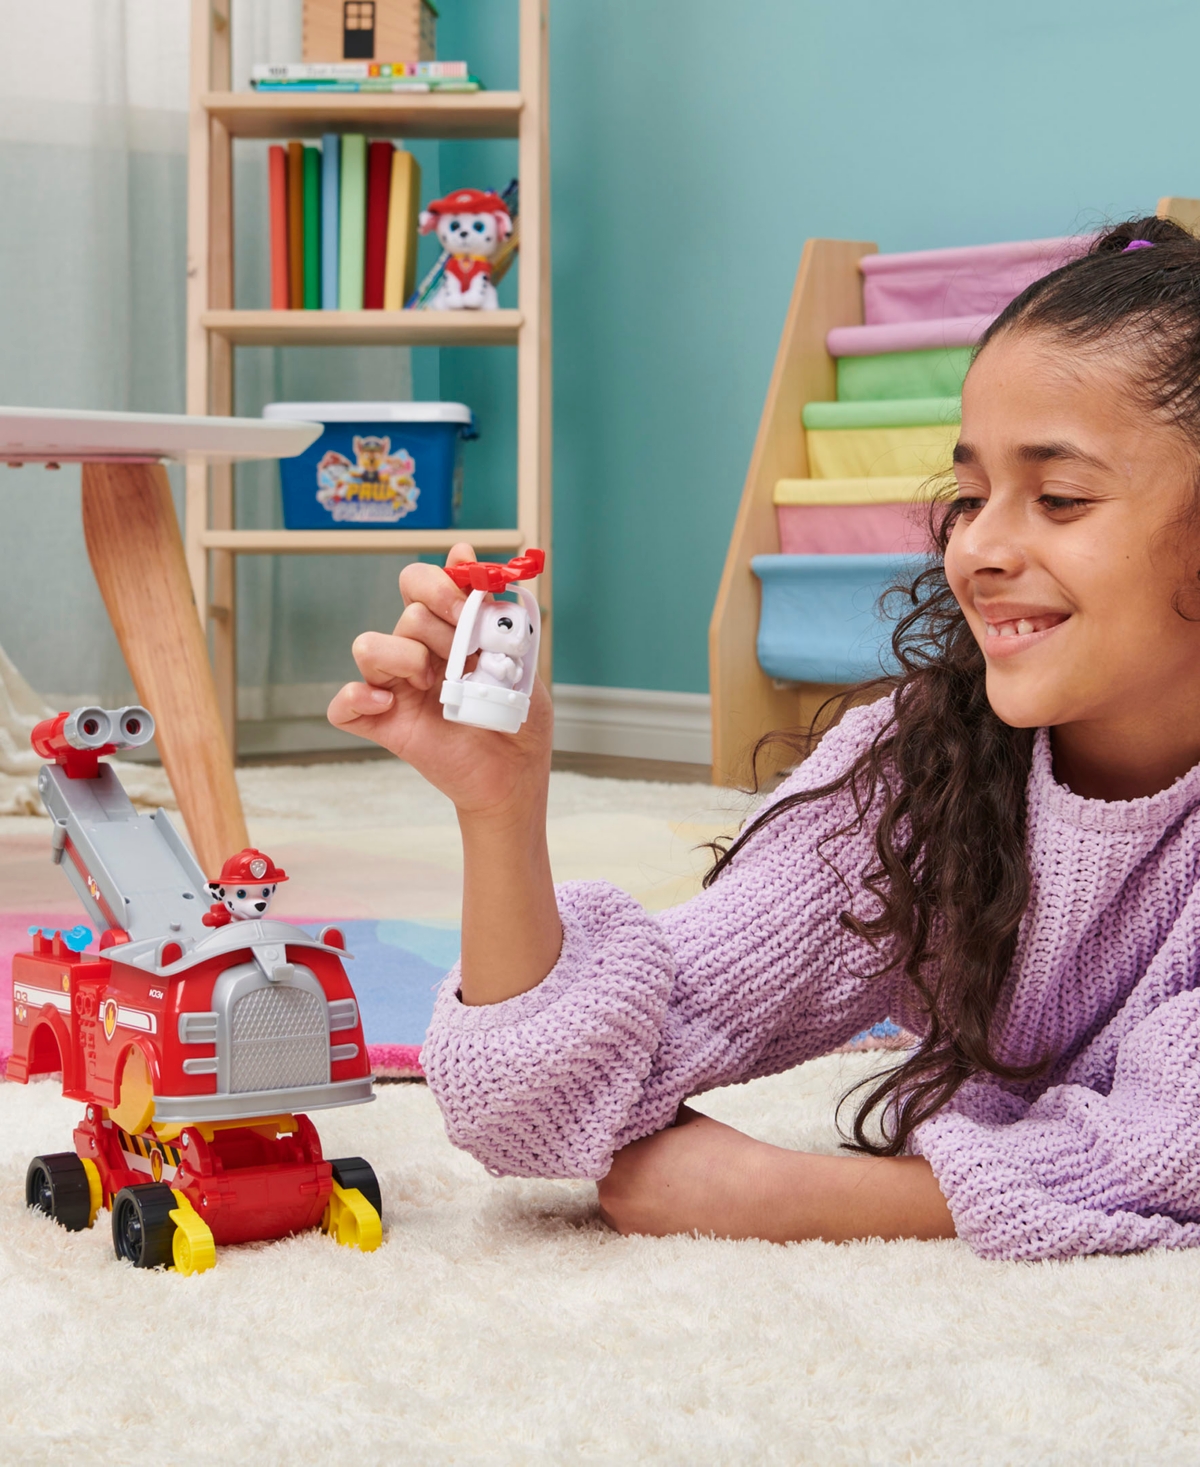 Shop Paw Patrol Marshall Rise And Rescue Changing Toy Car With Action Figures A In Multi-color